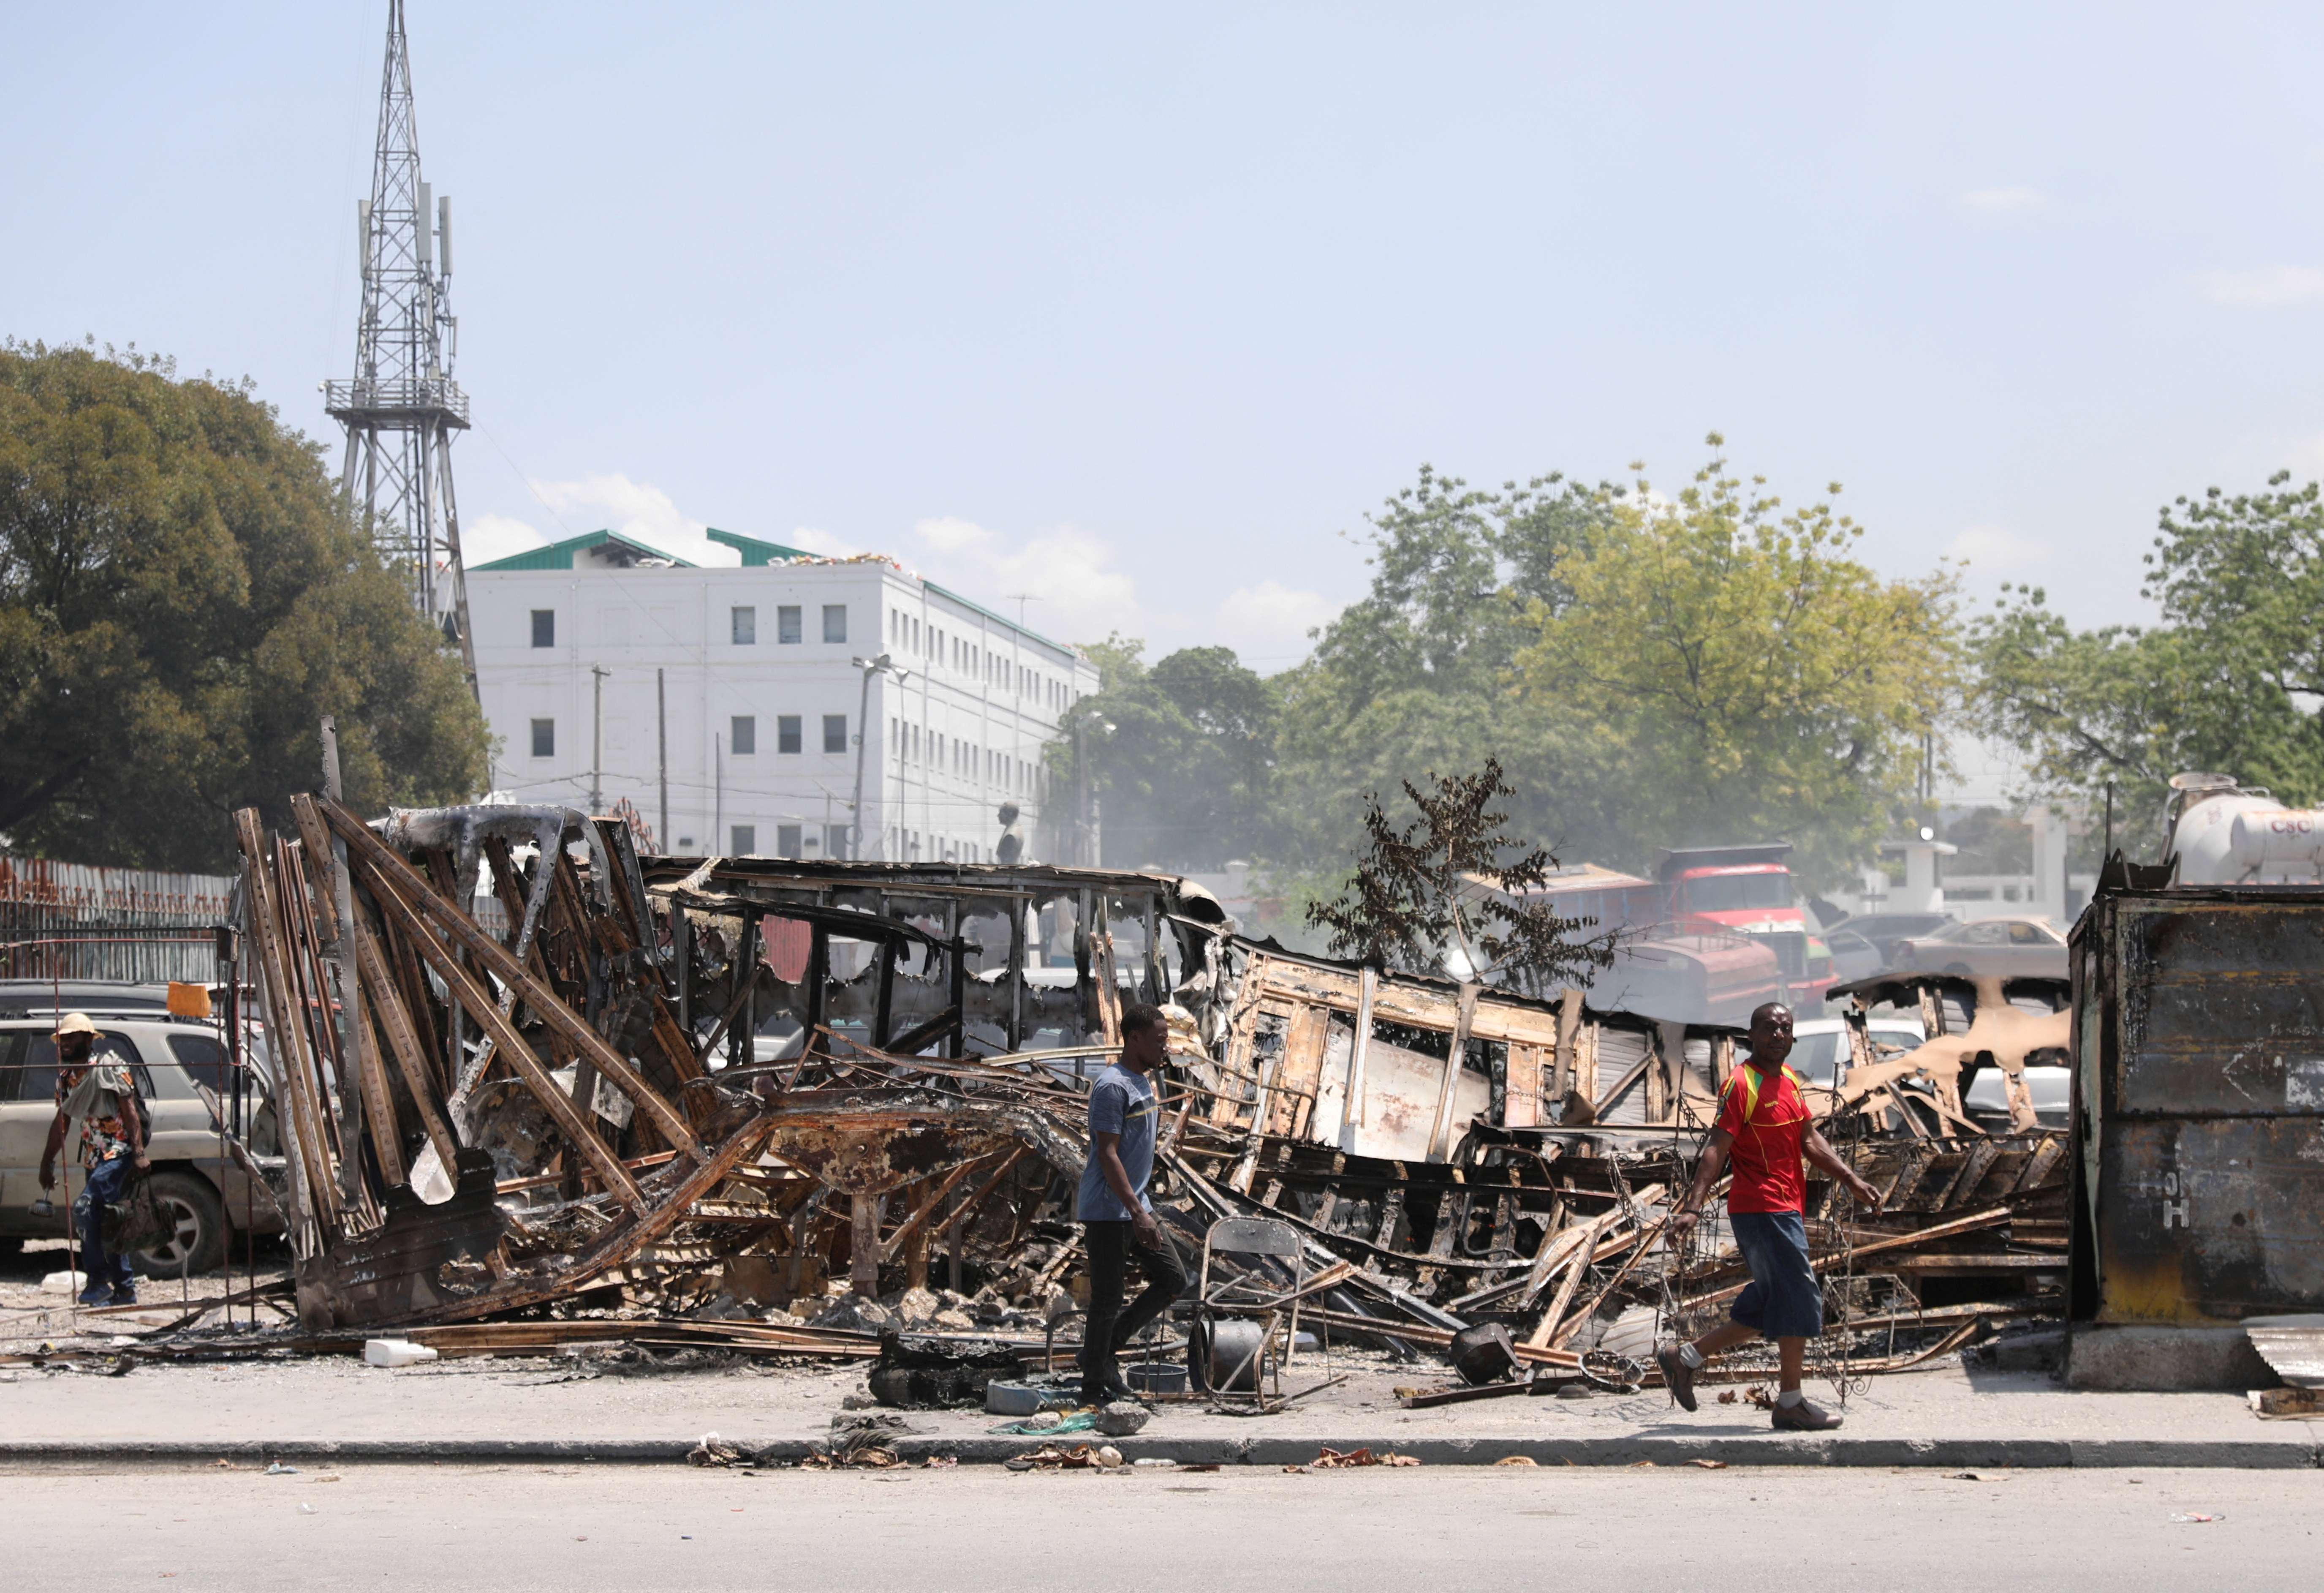 People walk past remains of vehicles after they were set on fire by gangs, in Port-au-Prince